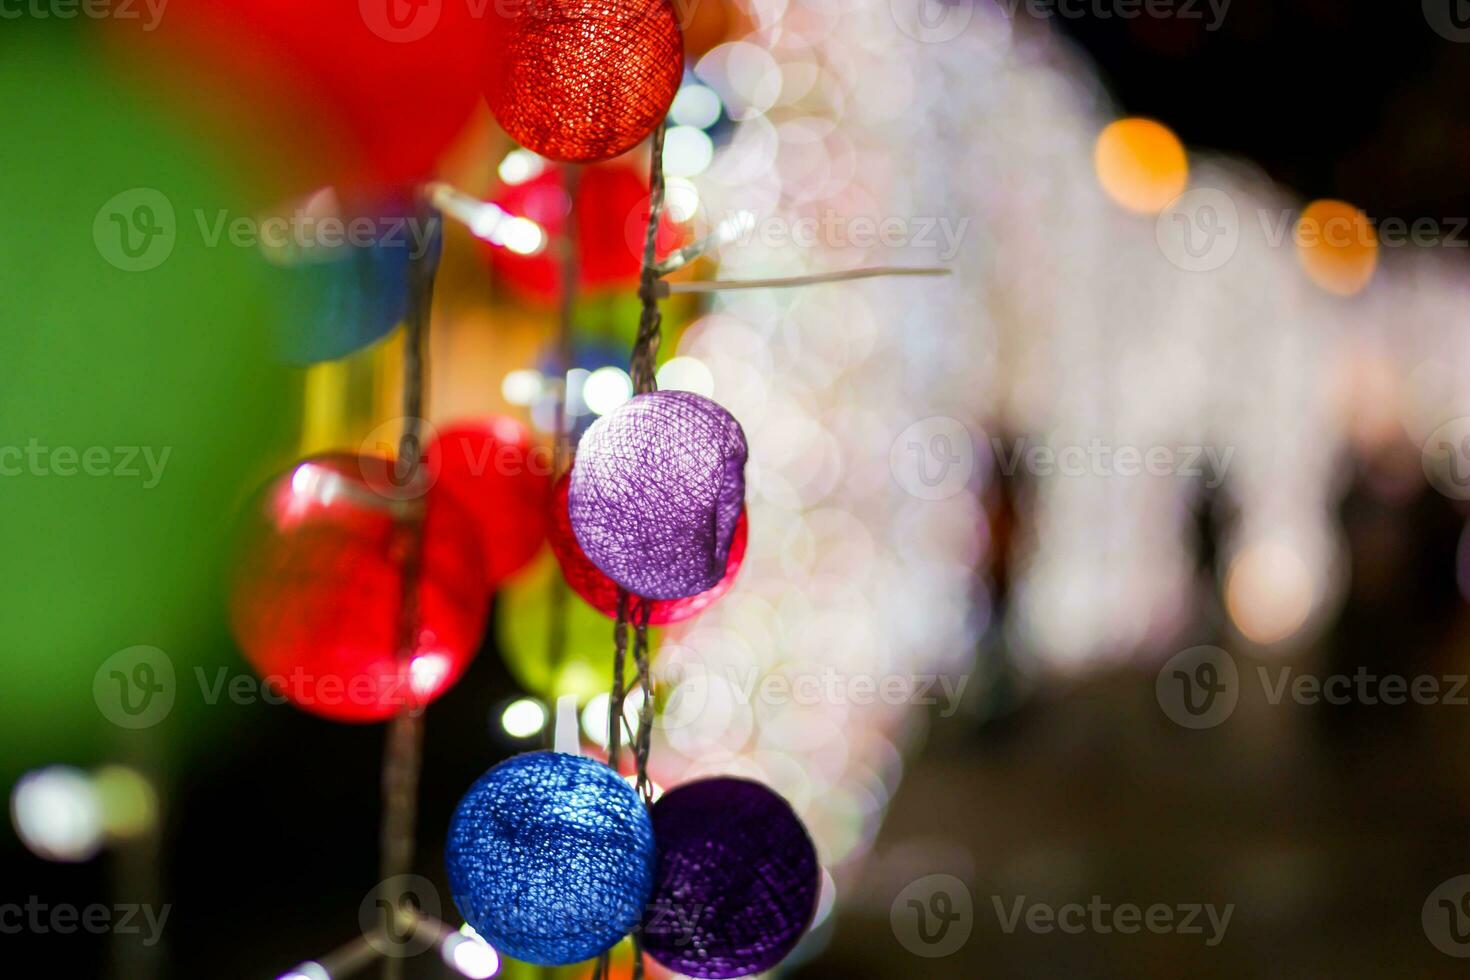 Crop and blurred image of Christmas decorate woven ball on night time background. photo